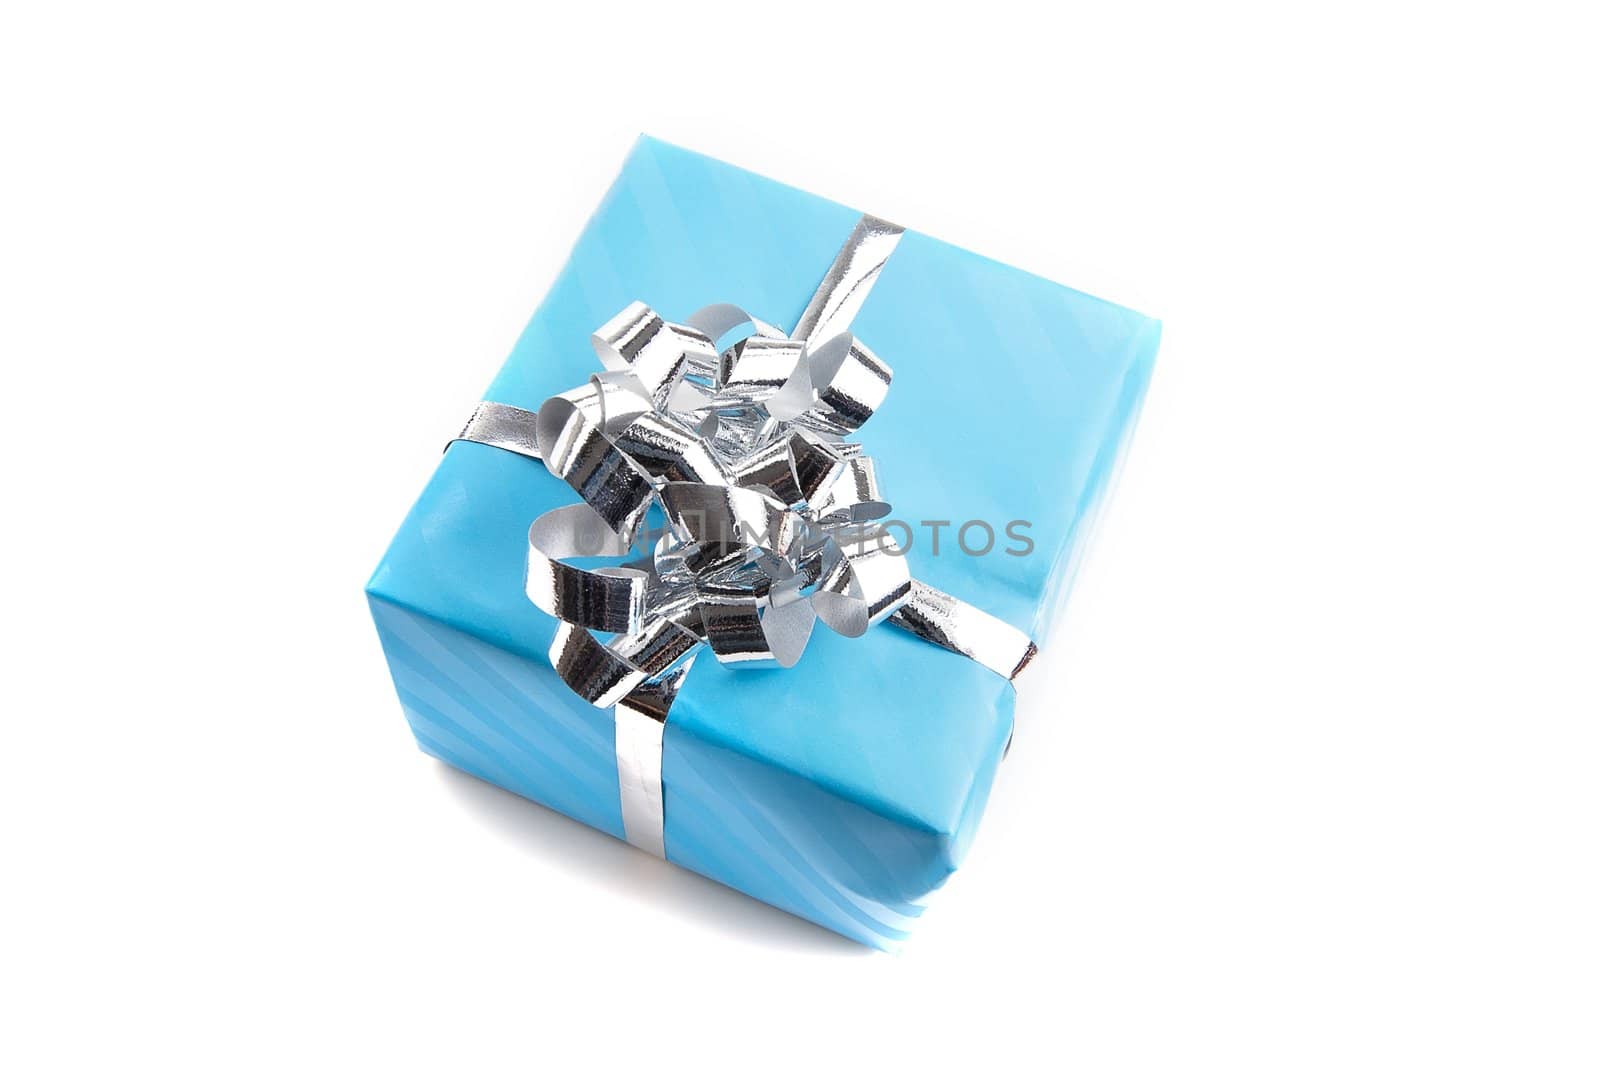 colorfull gift present with shiny ribbons isolated on white background